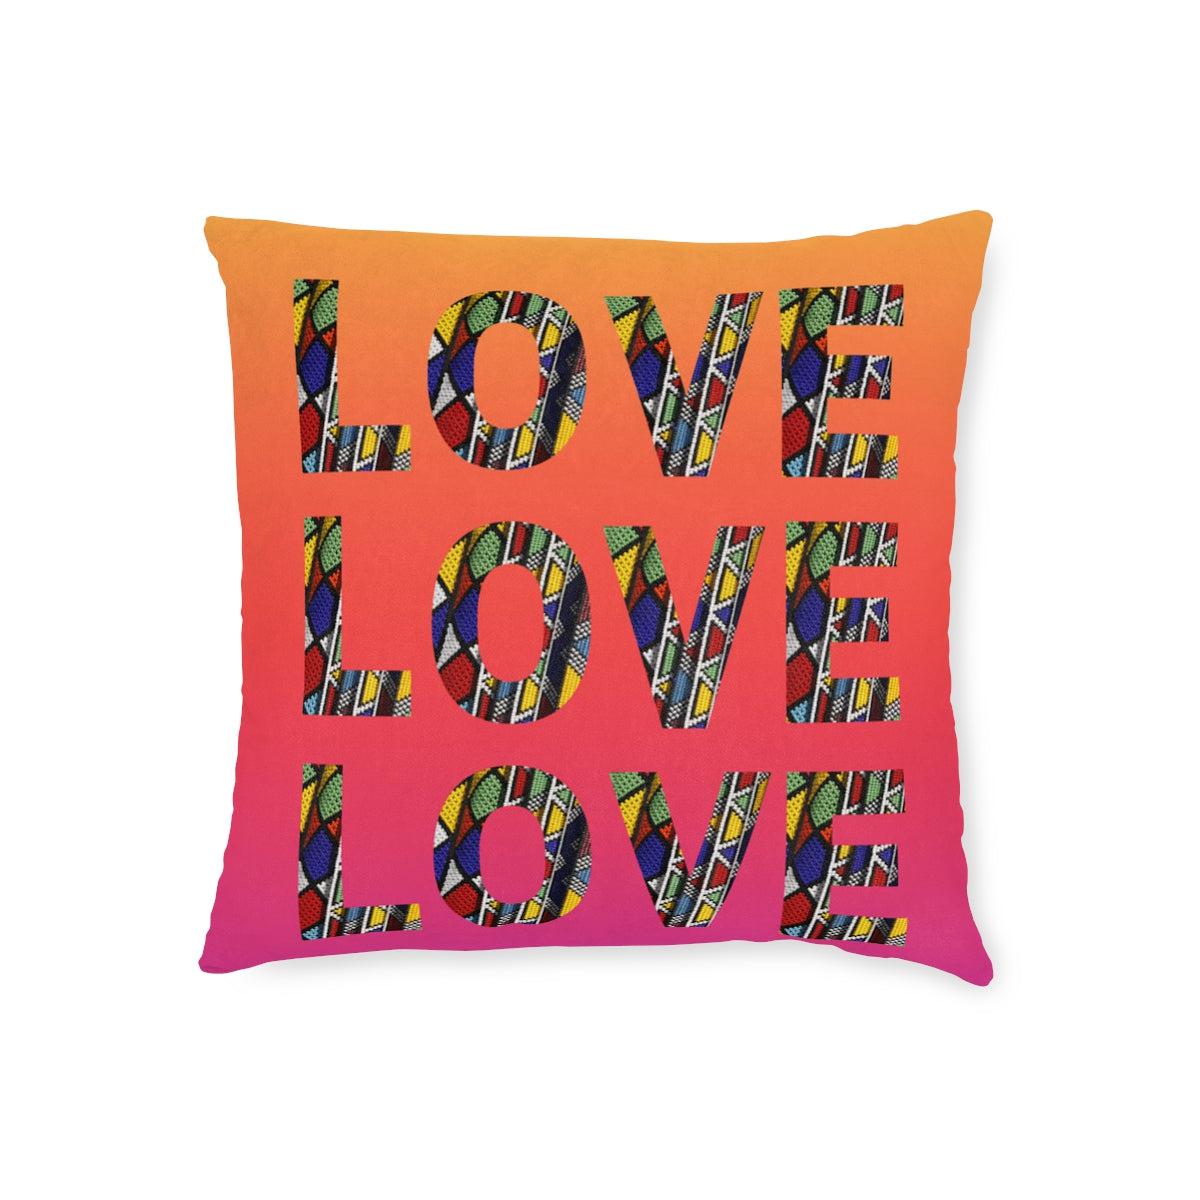 African Love Words Cushion with Insert.